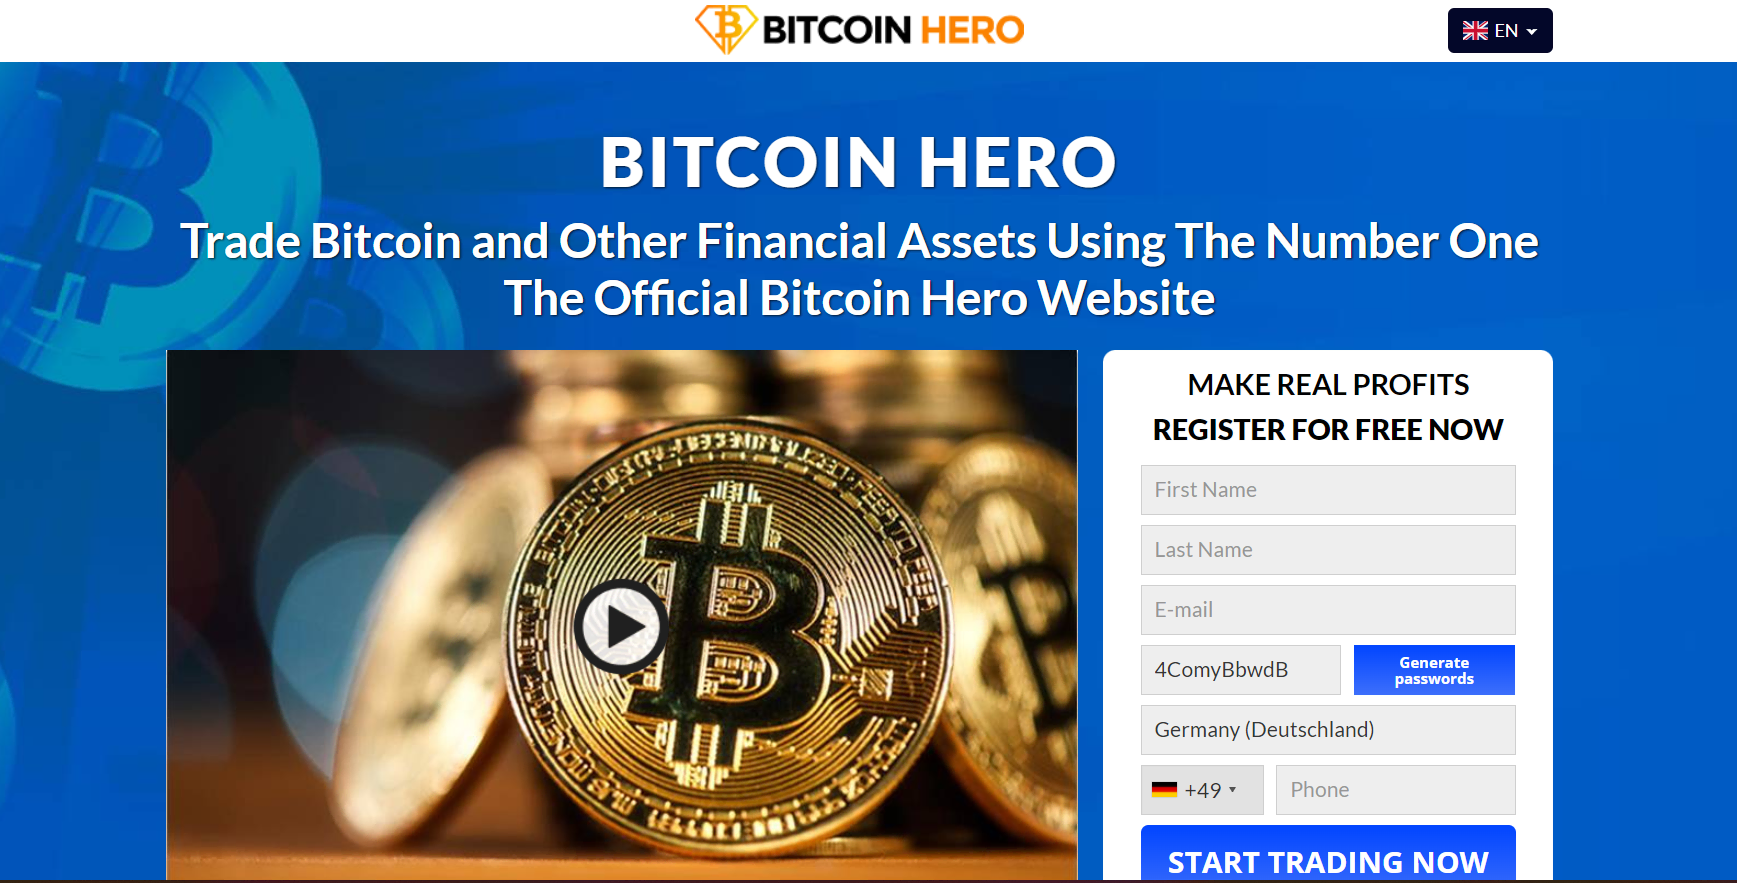 the official website of Bitcoin Hero